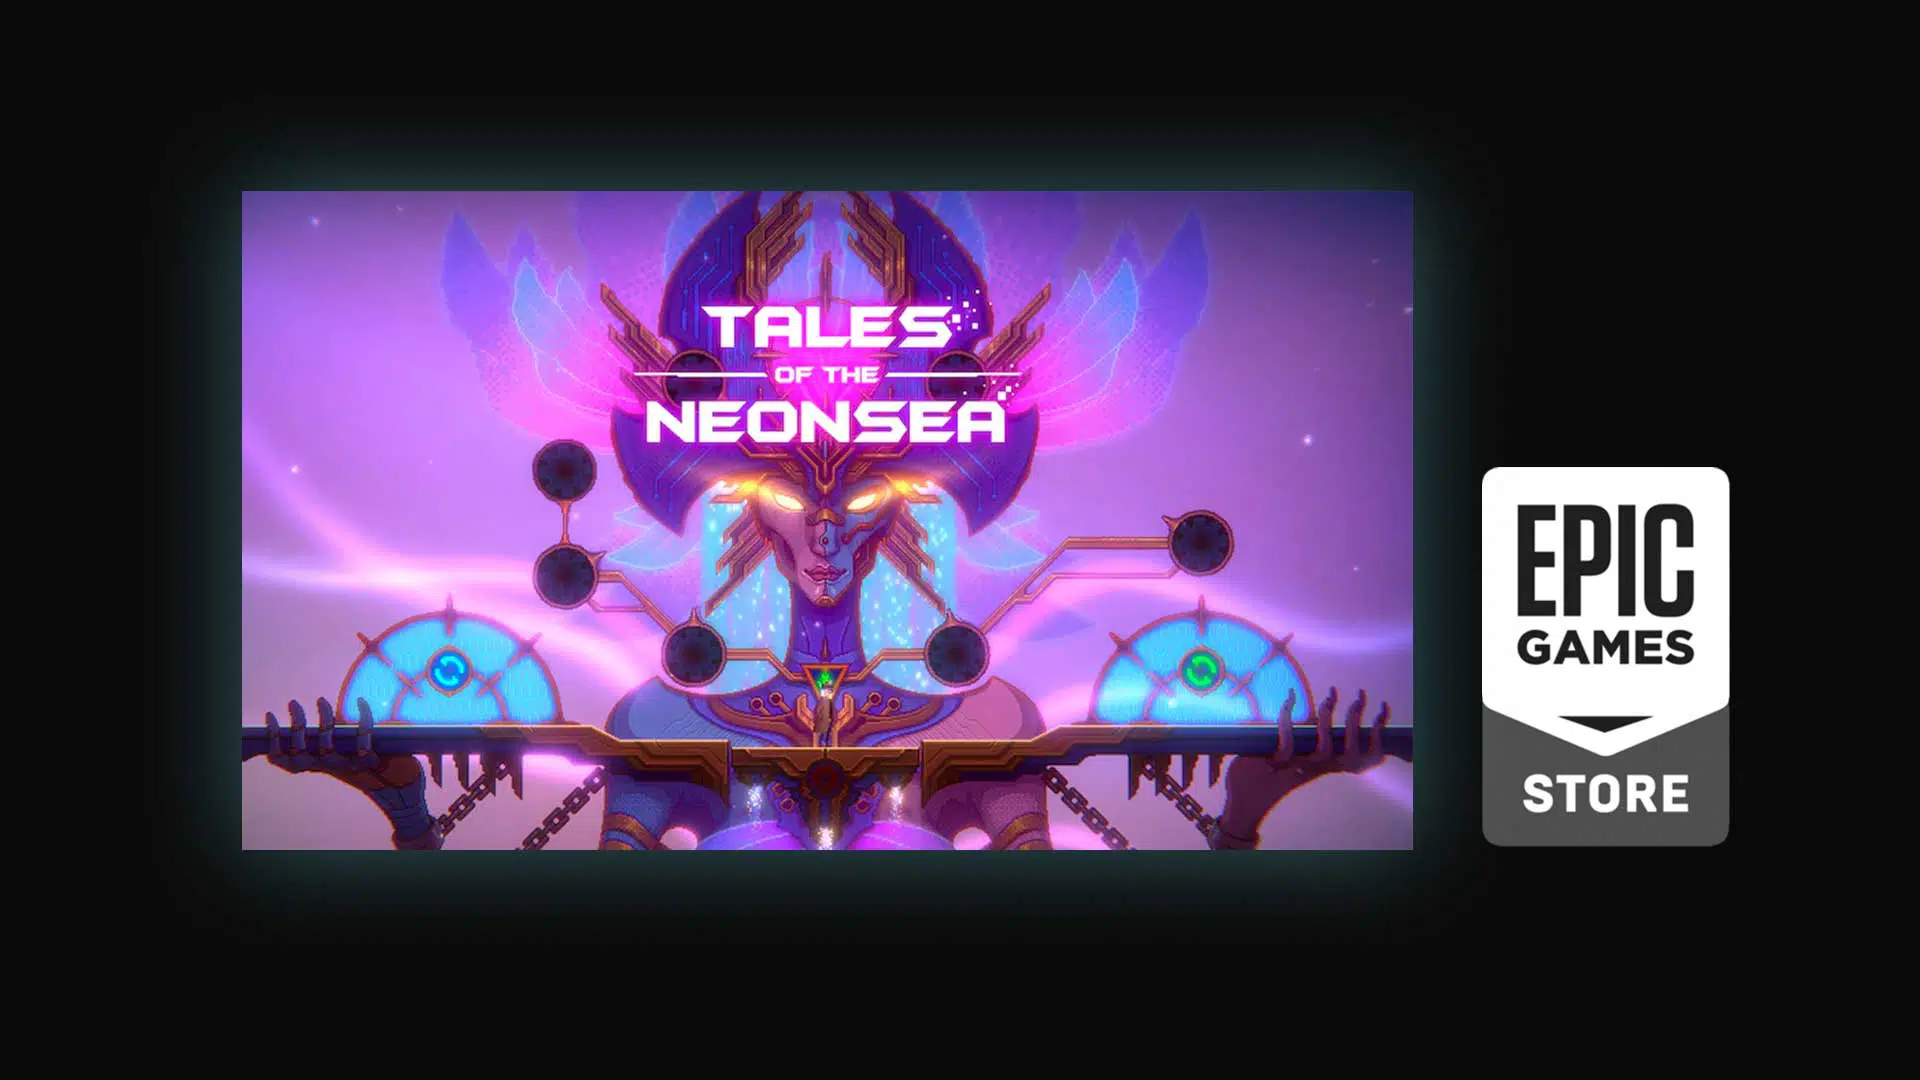 epic game free game 2021 tales of the neonsea